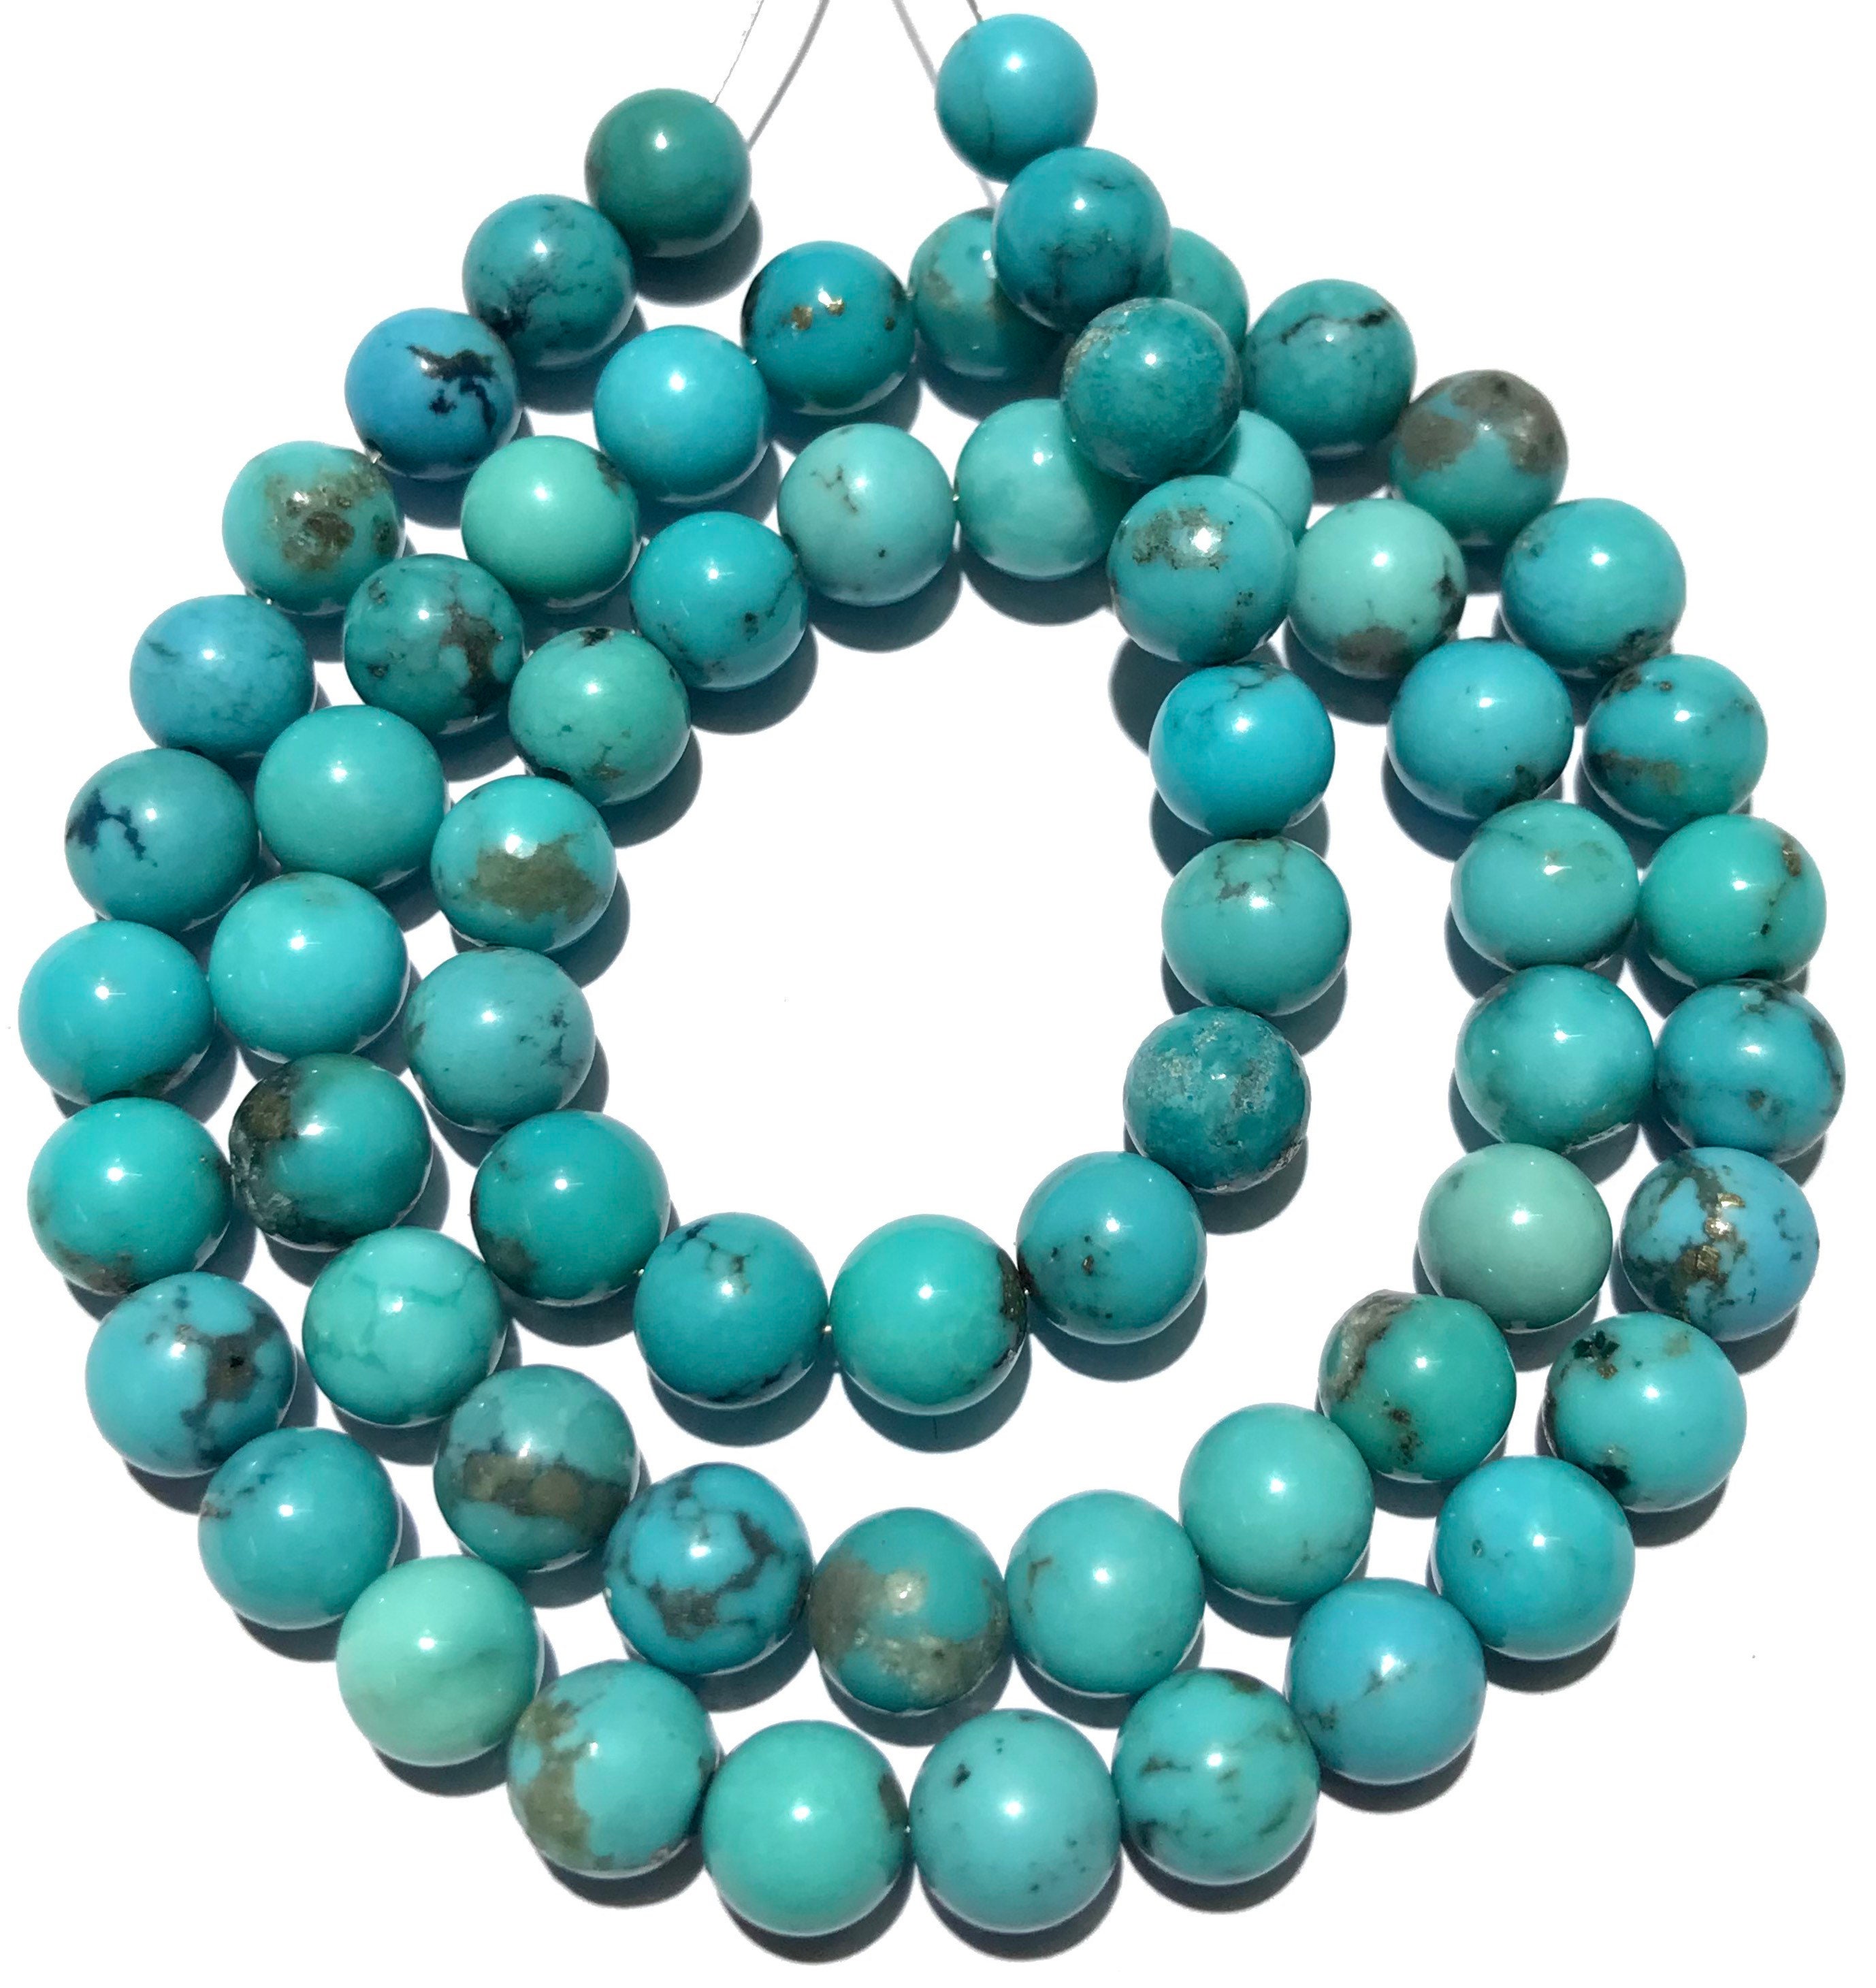  Zenkeeper 108 Pcs Turquoise Beads for Jewelry Making 8